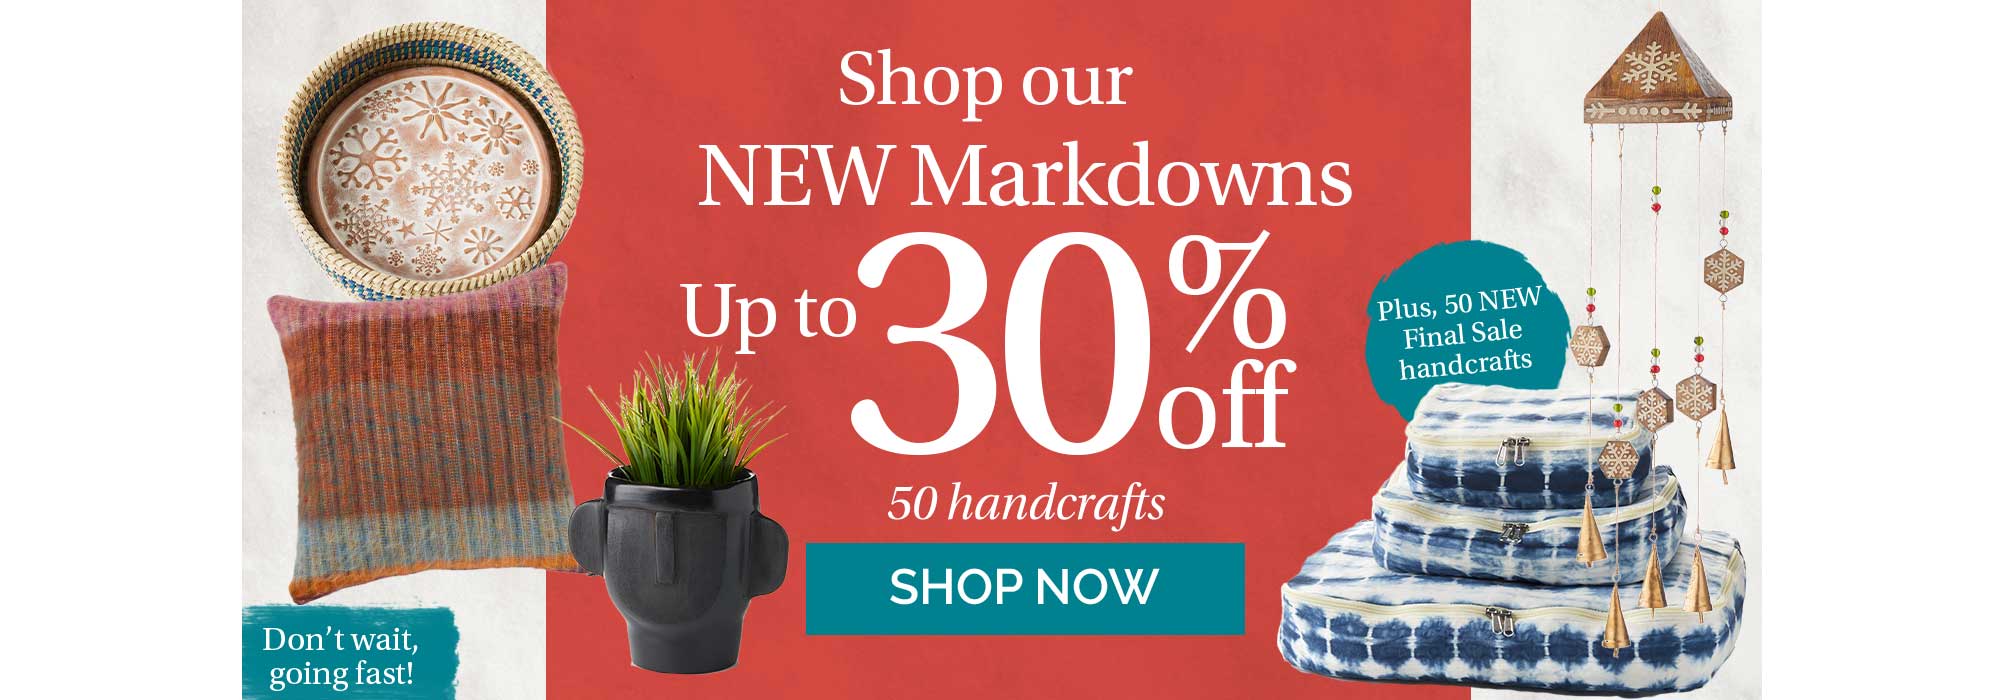 03 14 newmarkdowns homepage